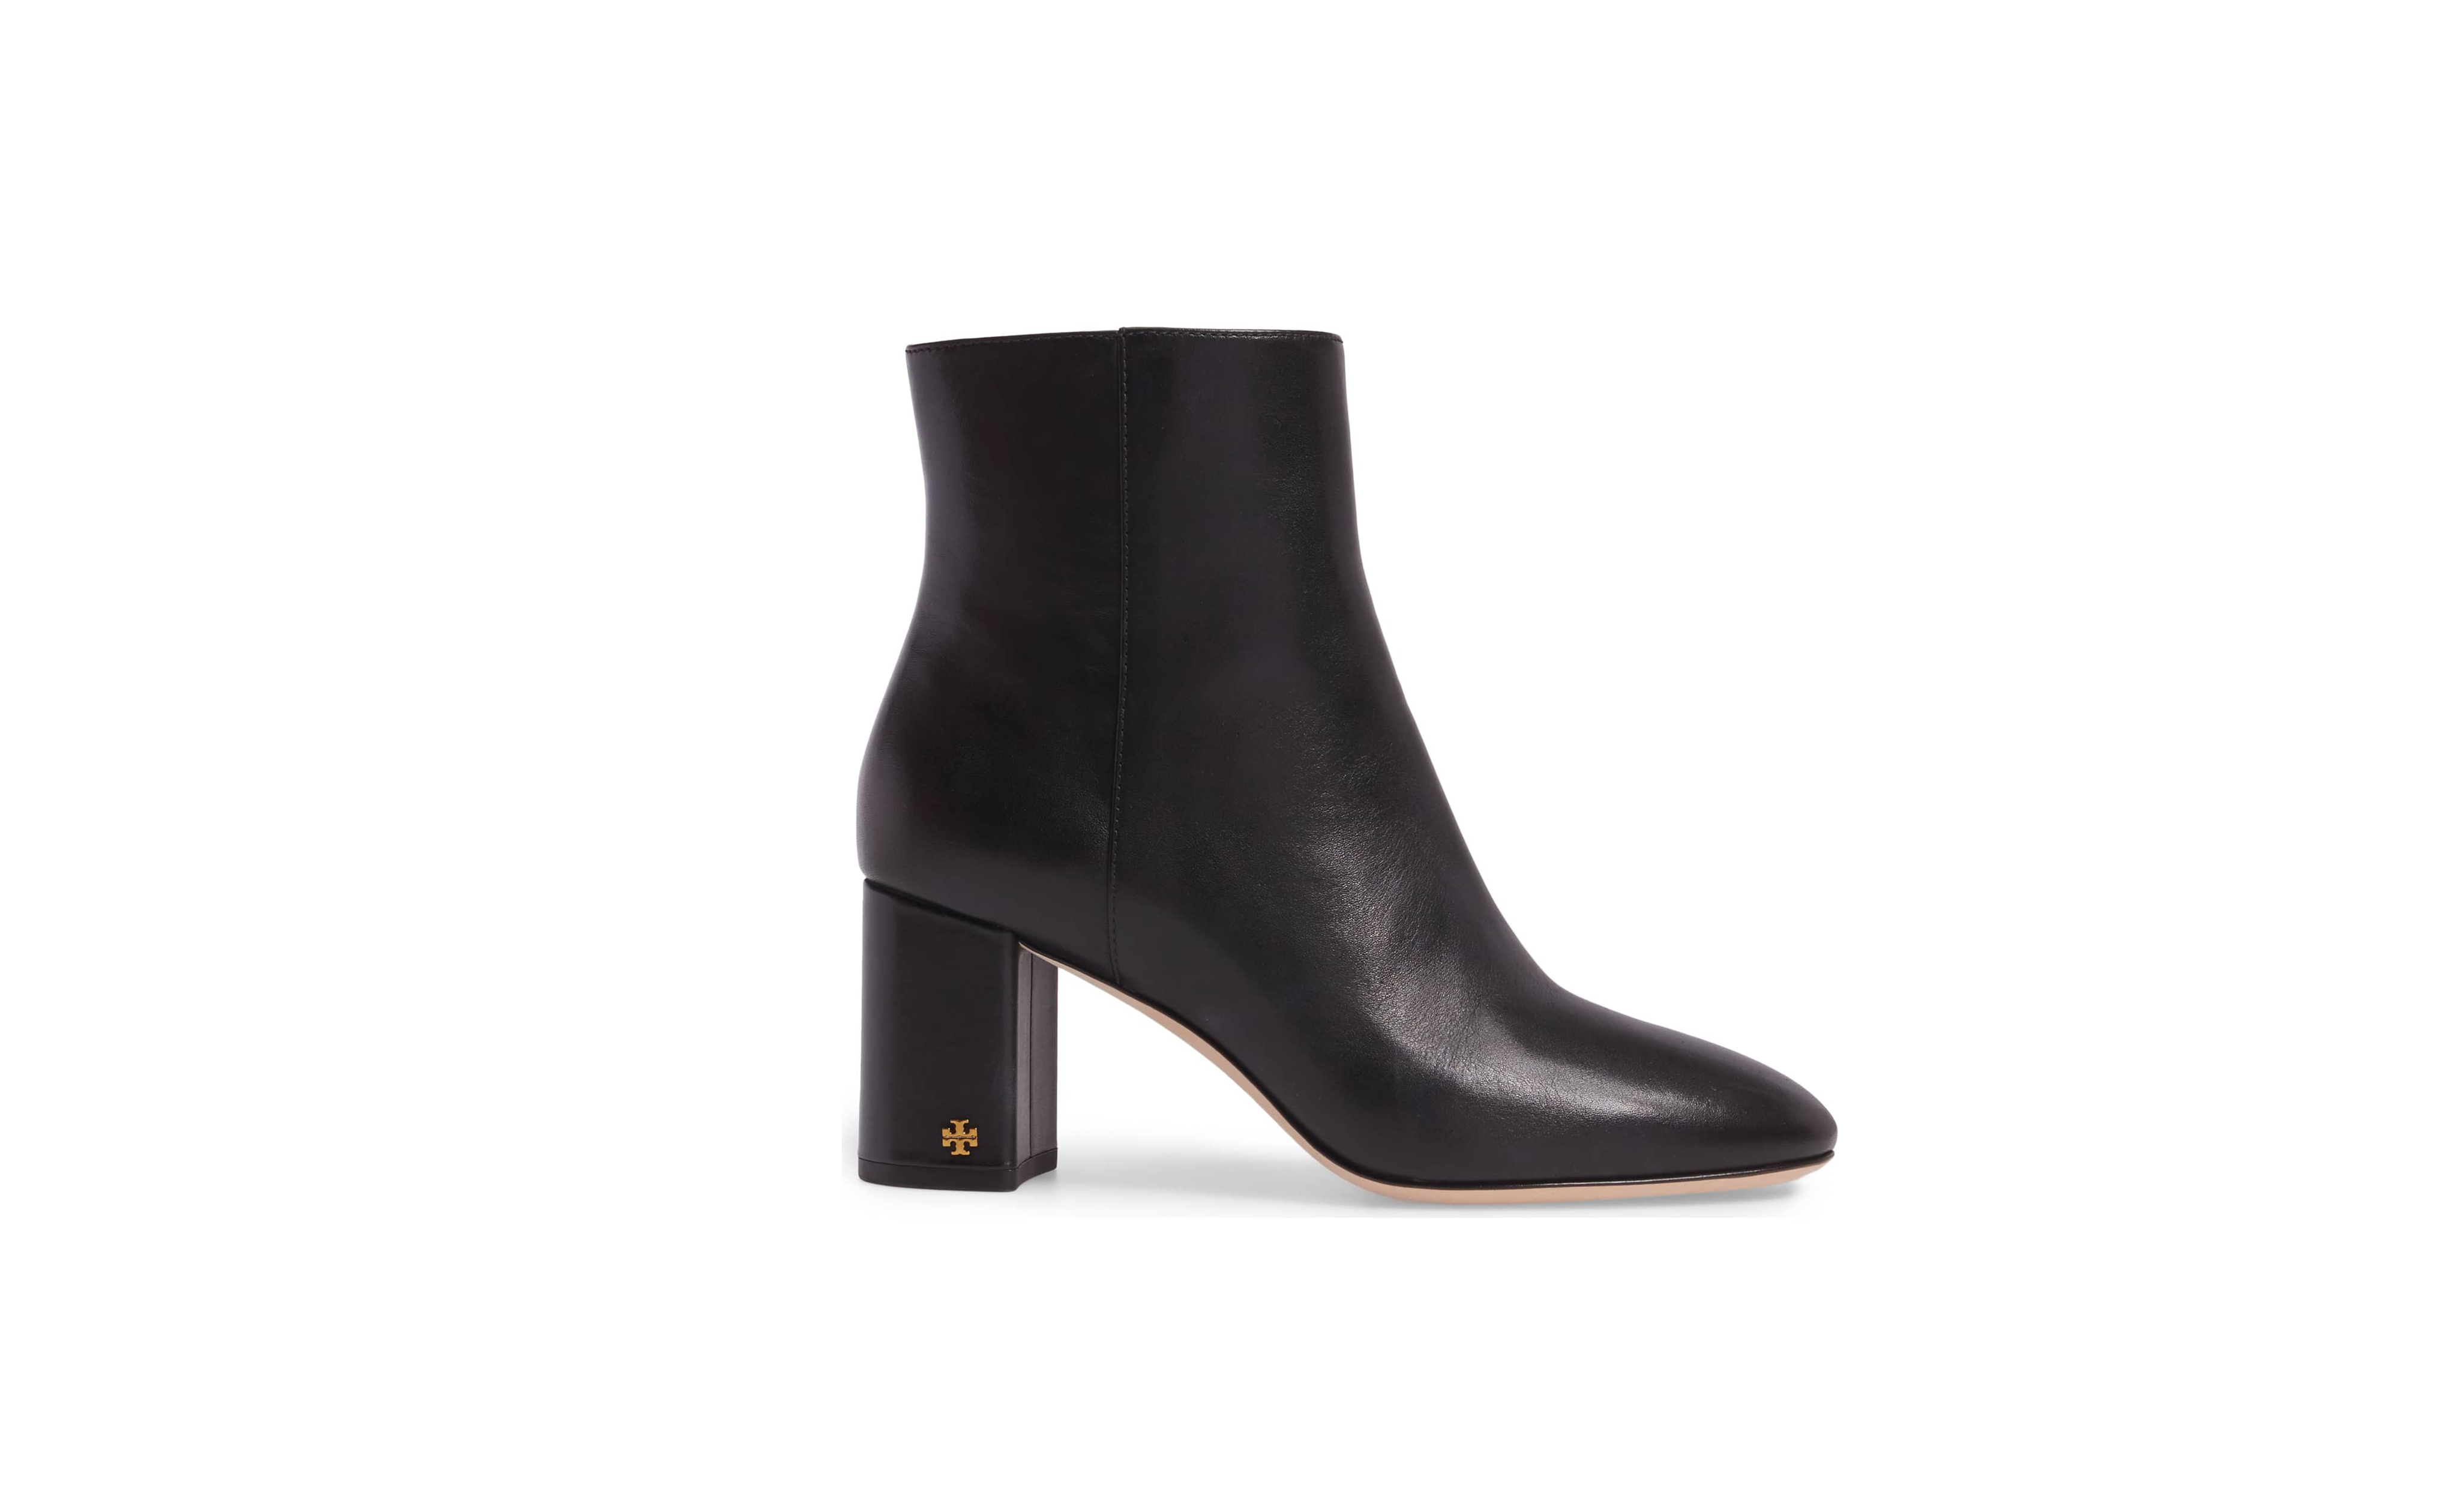 Nordstrom Sale: Shop Tory Burch Brooke Booties for 50 Percent Off